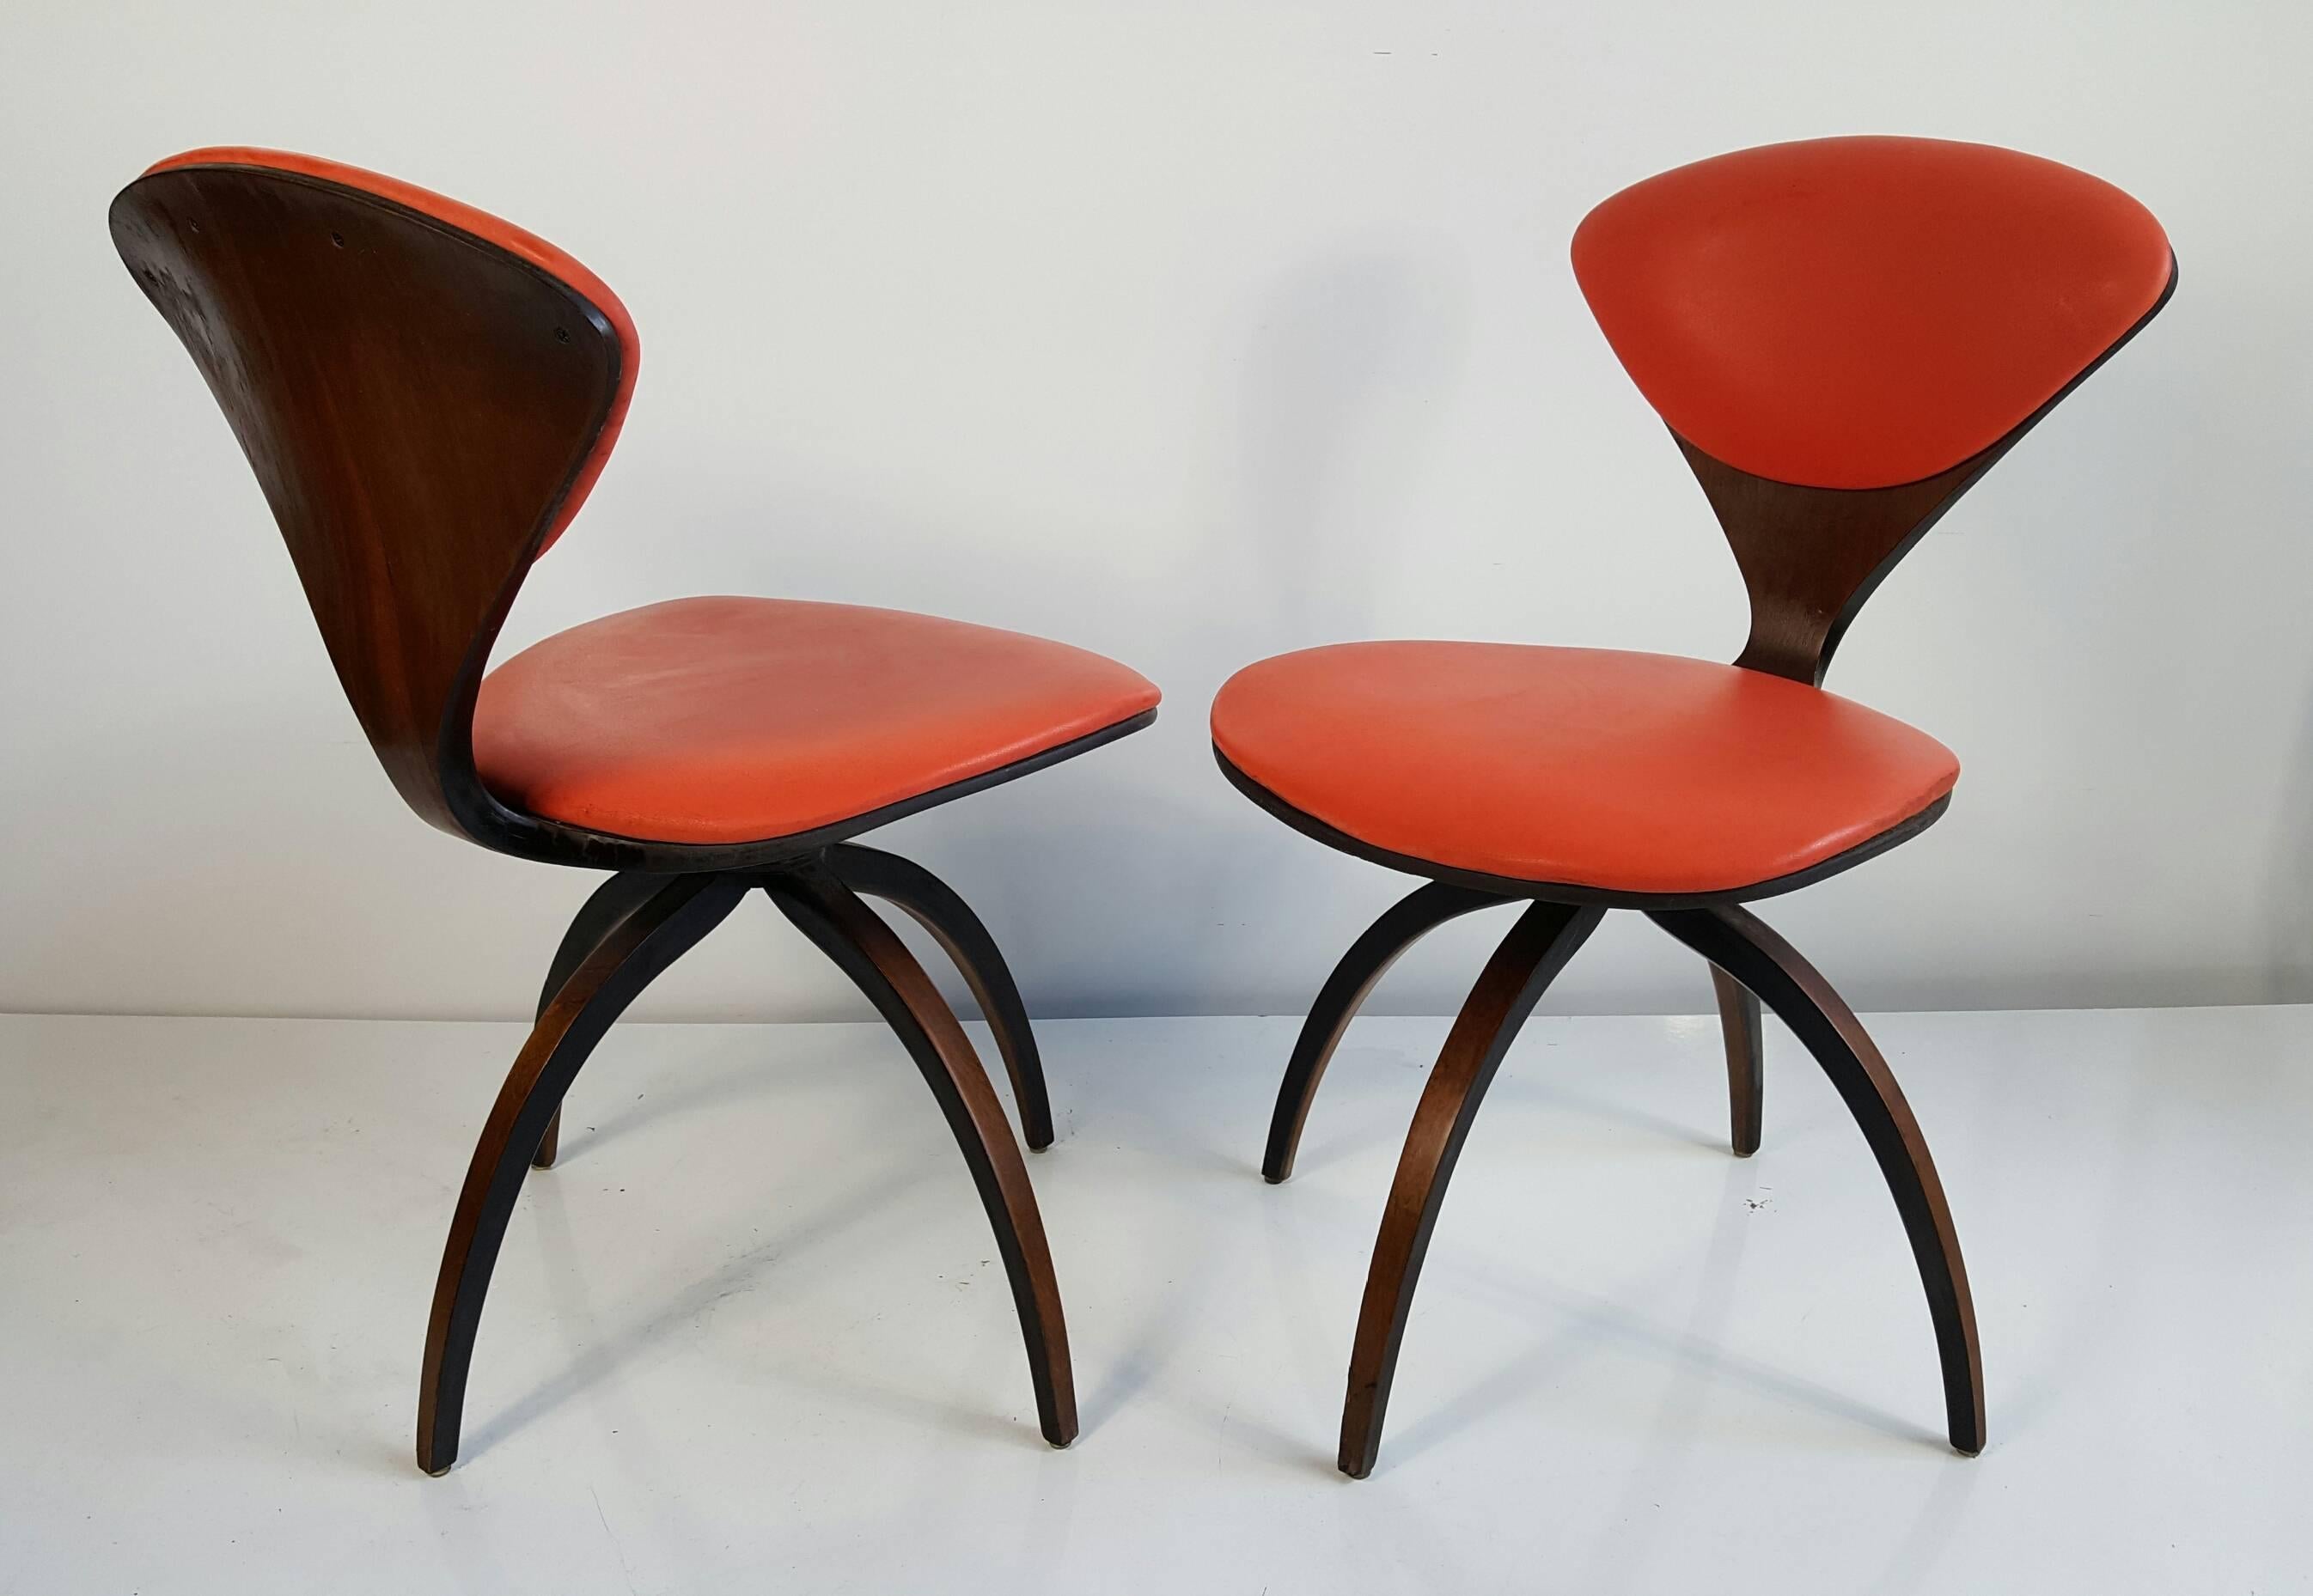 20th Century Pair of Norman Cherner Swivel Chairs for Plycraft, American, circa 1959